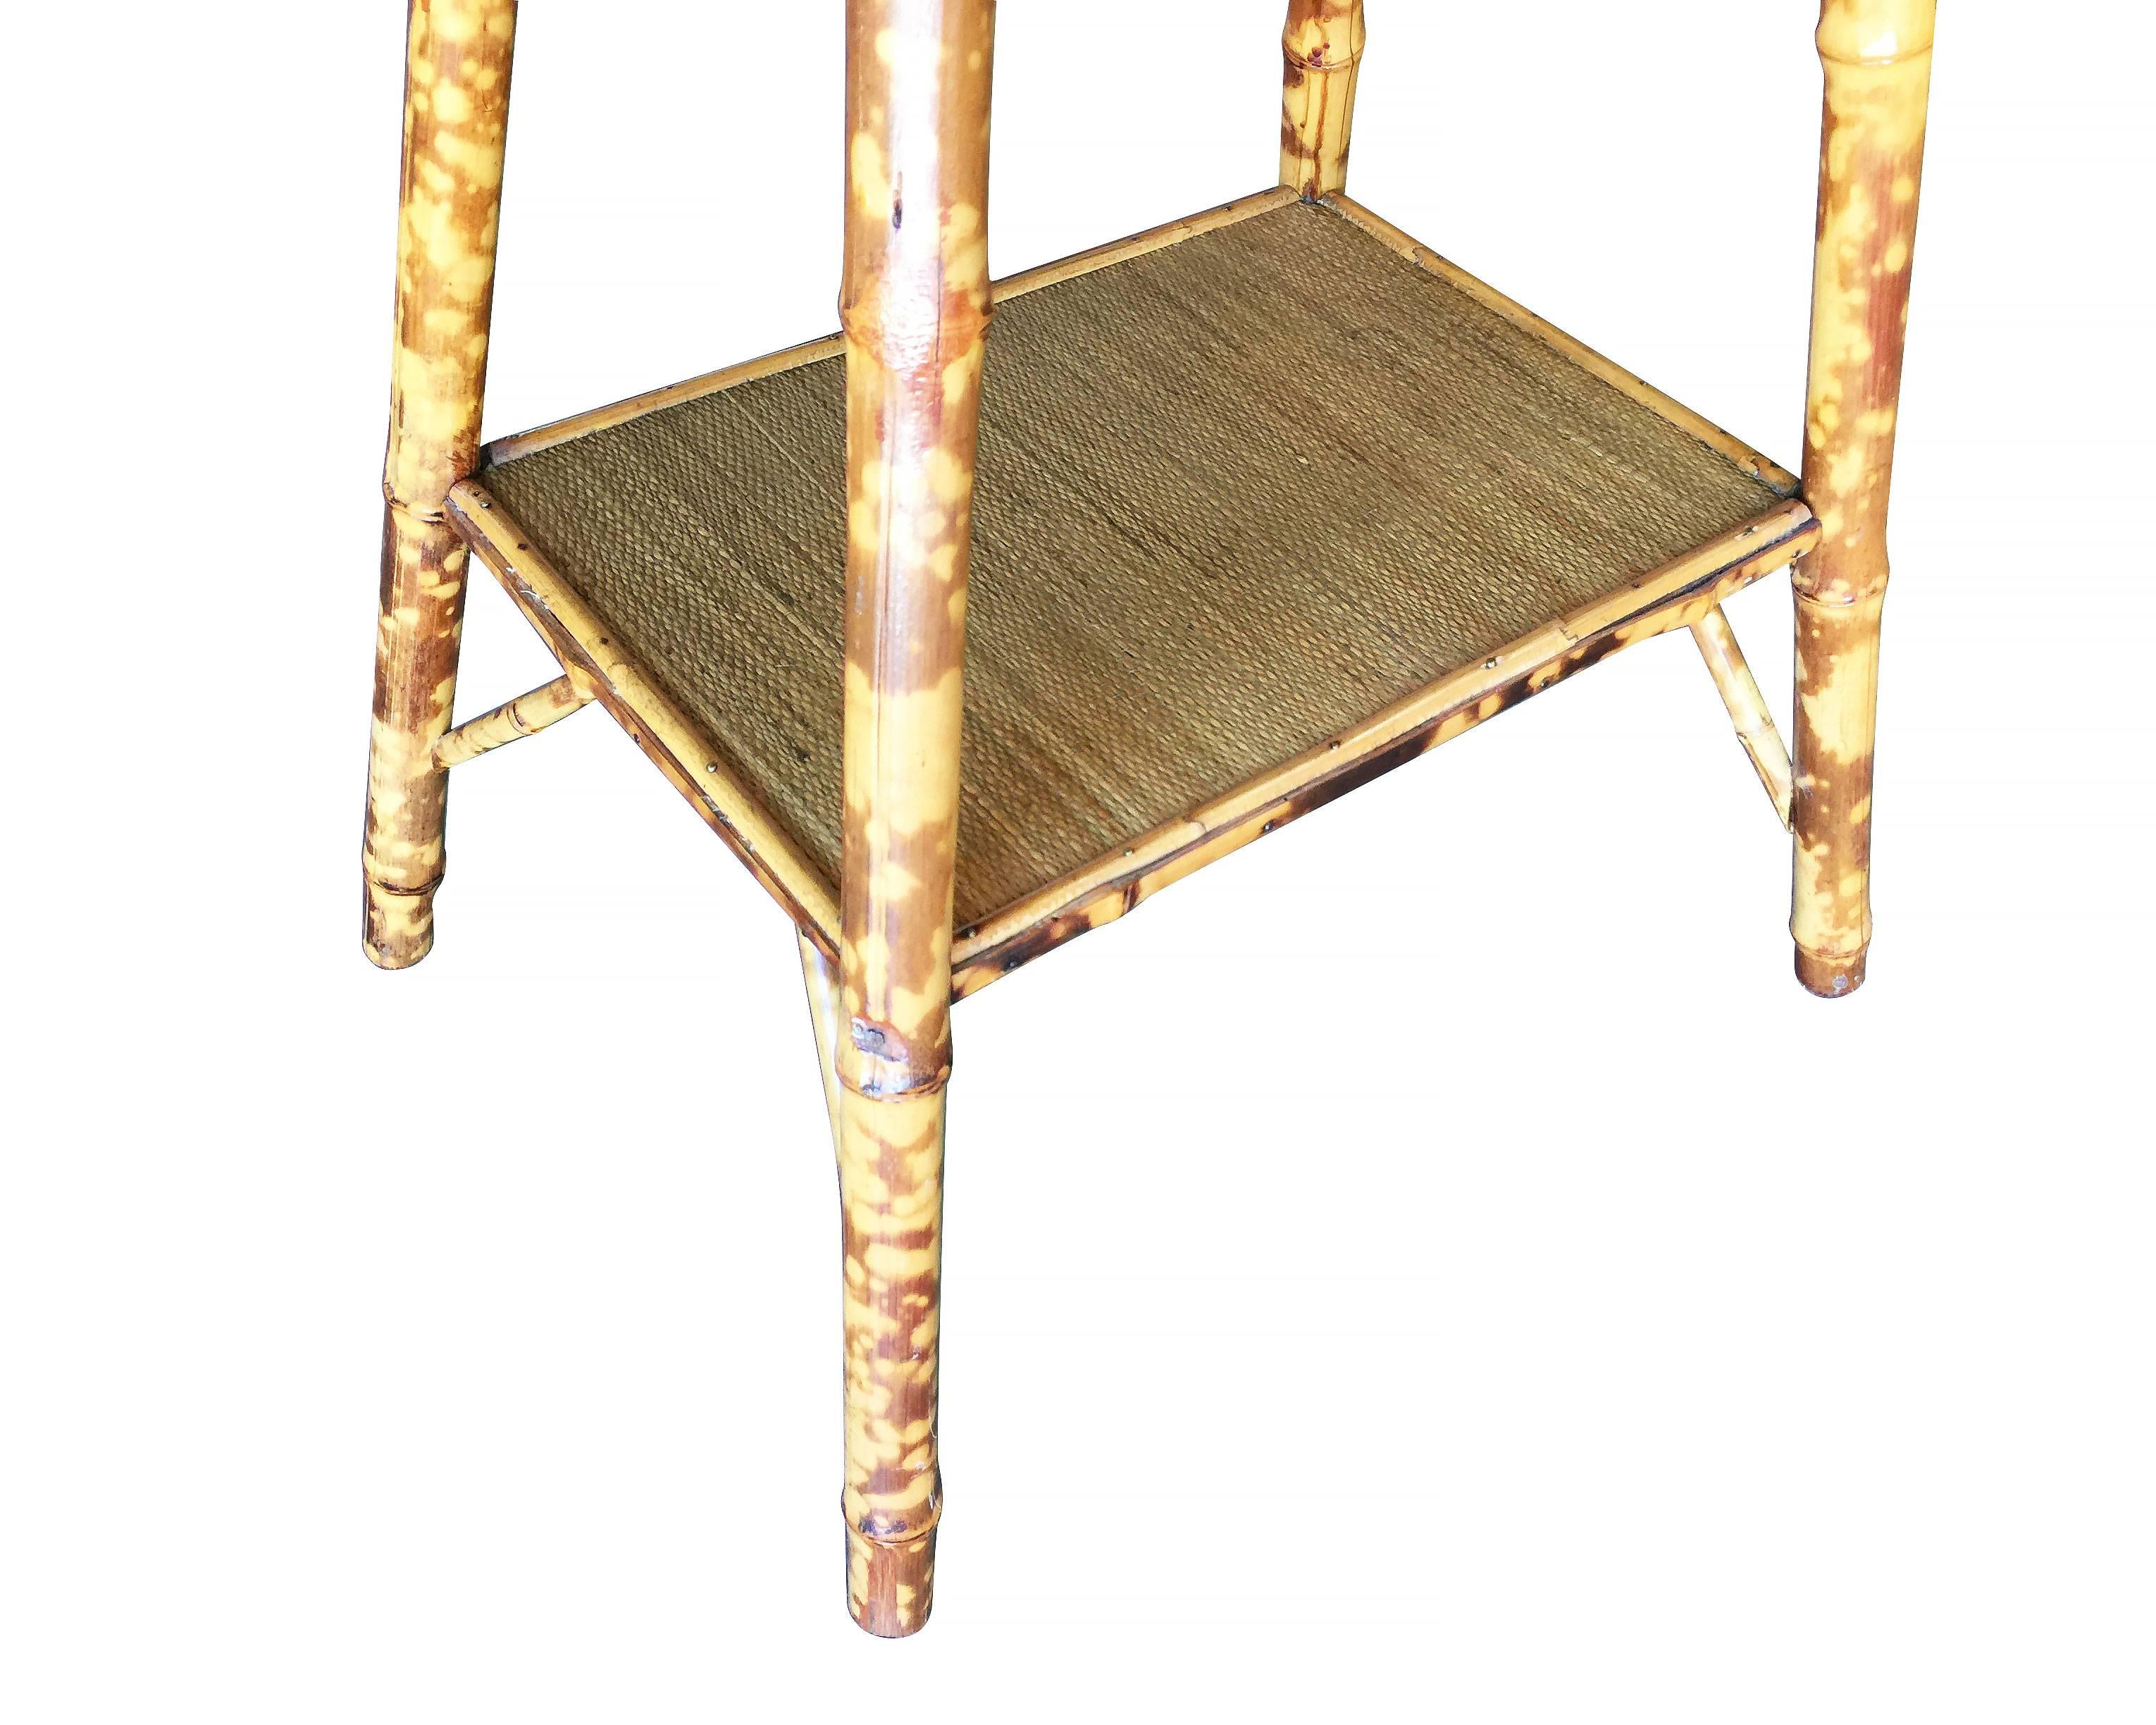 Pedestal Side Table with Tiger Bamboo Frame with Bottom Shelf 1